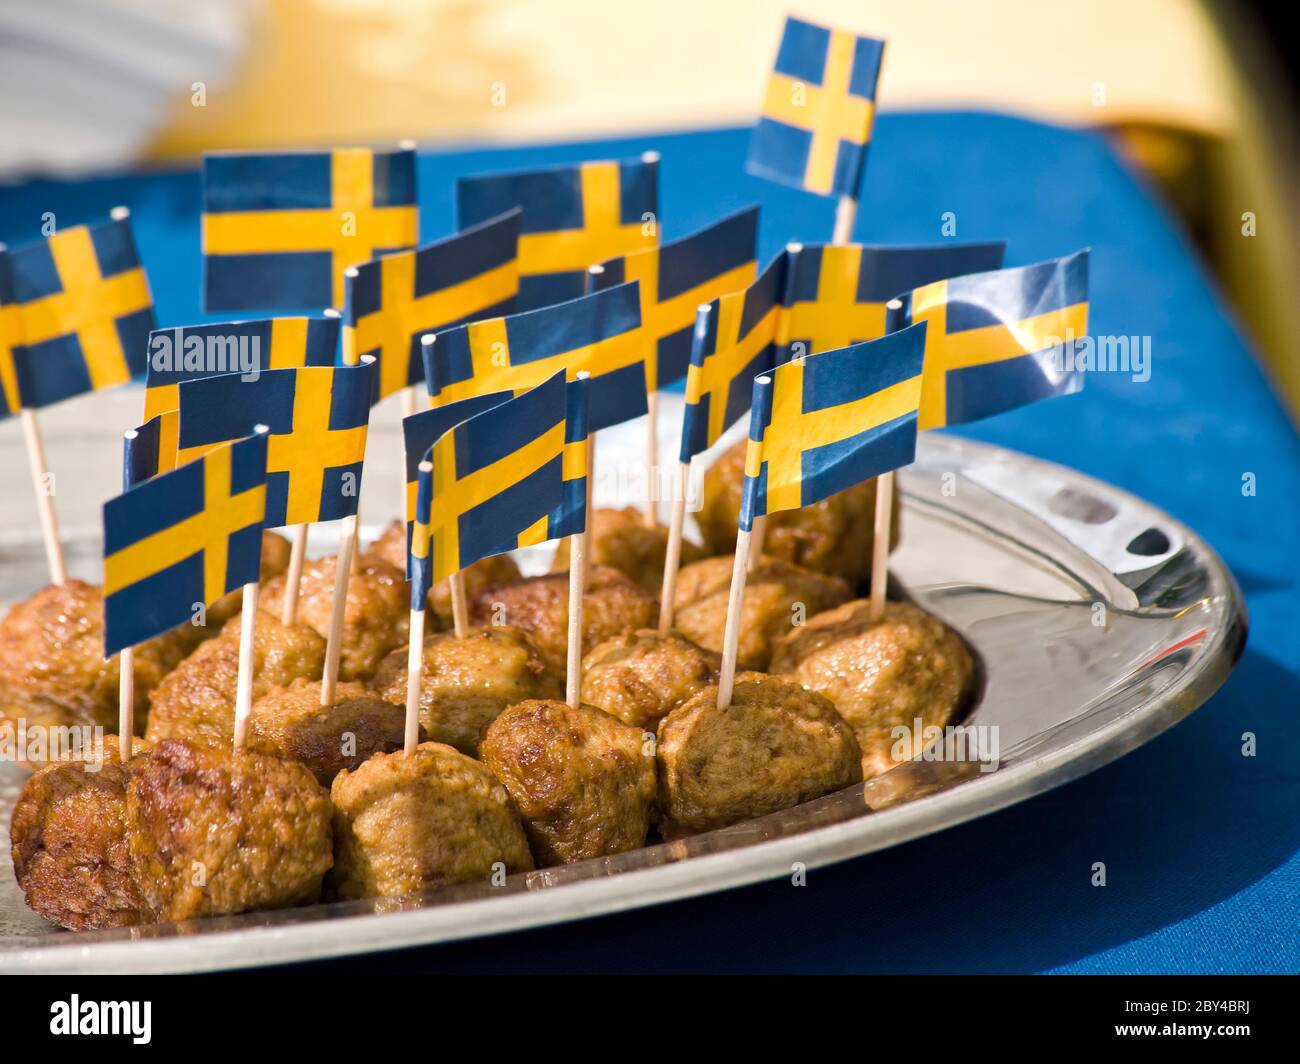 meatballs with swedish flags on toothpicks on a platter Stock Photo